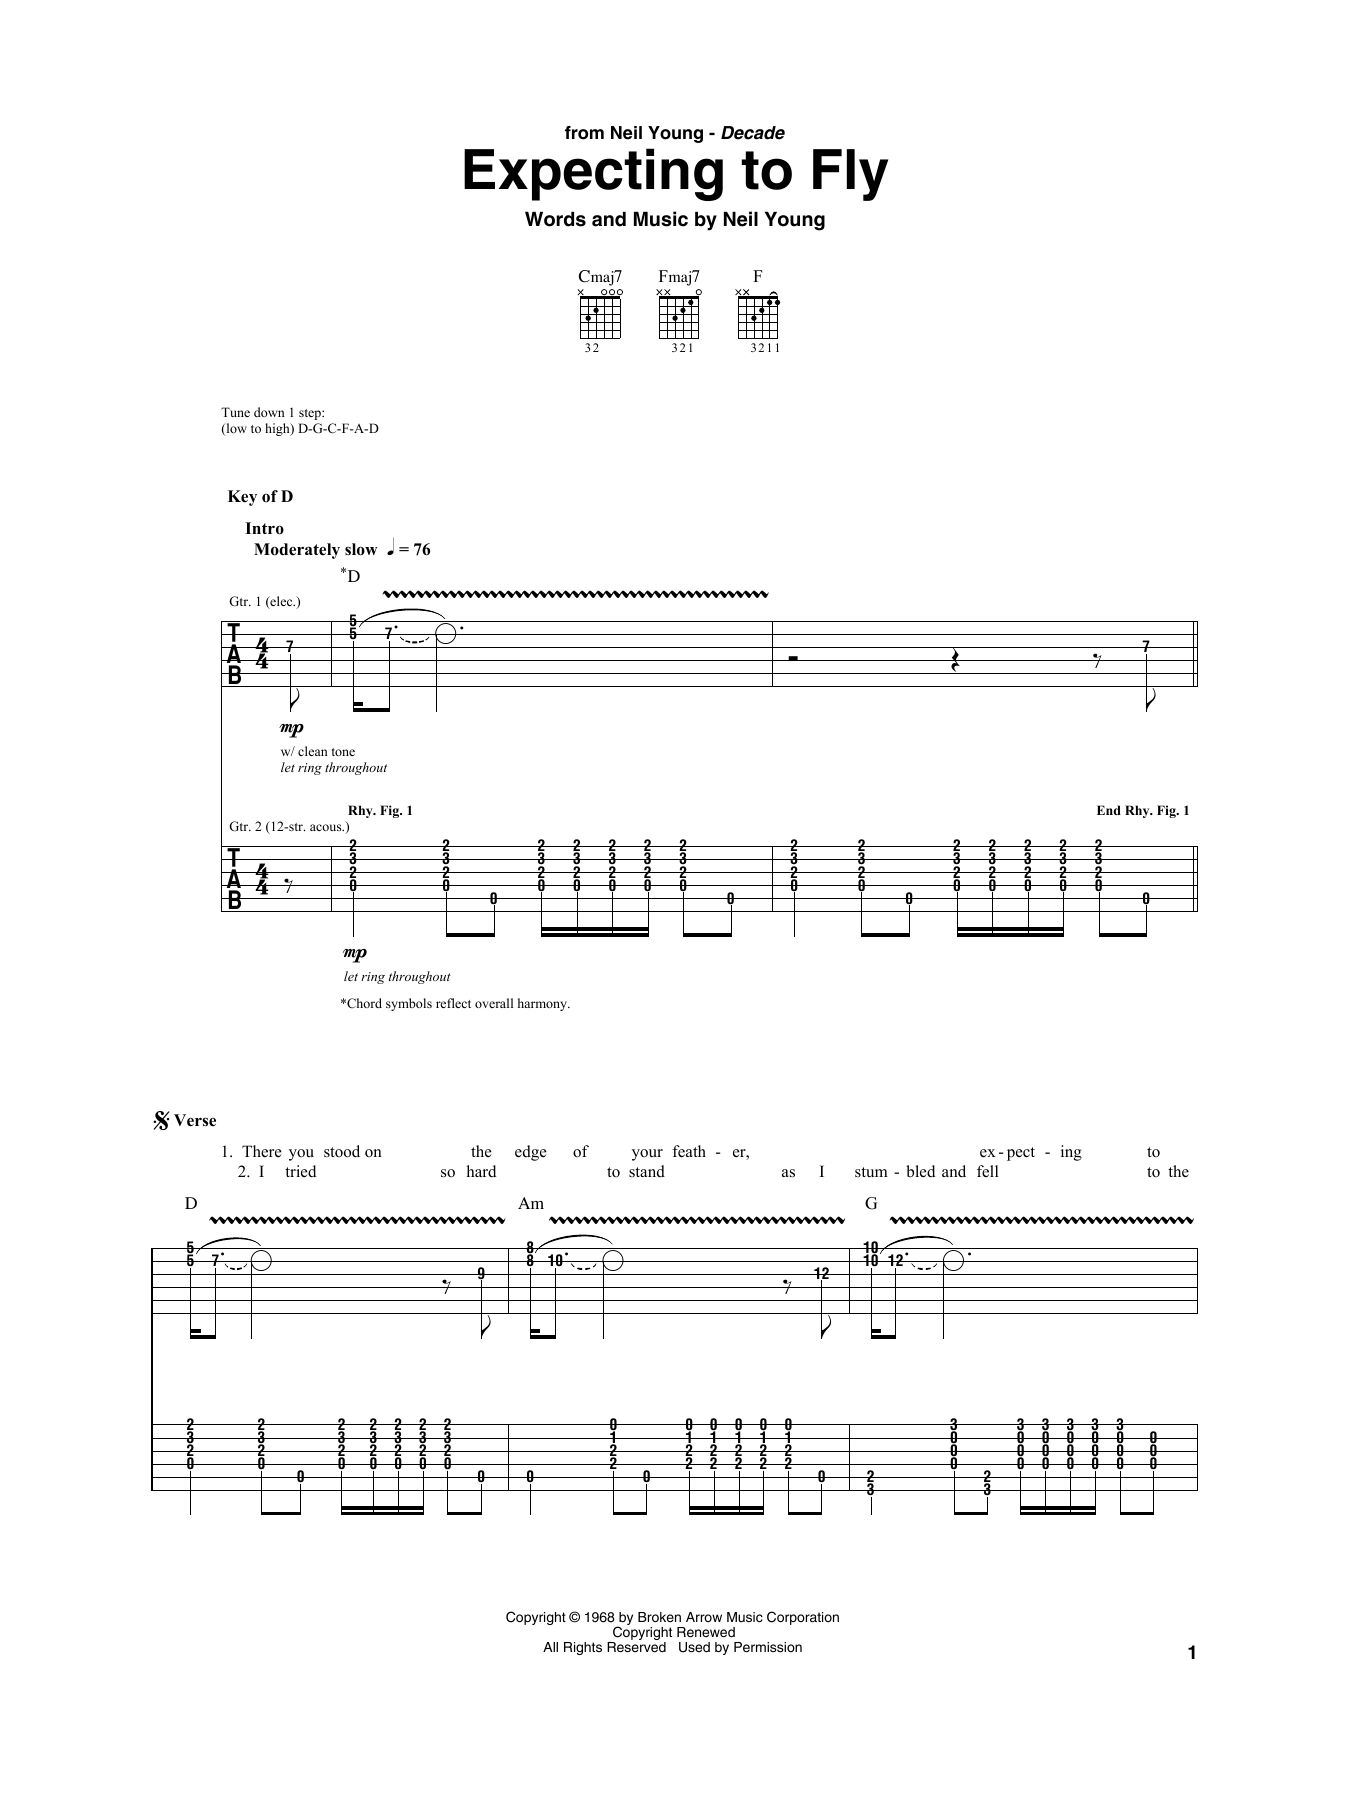 Download Neil Young Expecting To Fly Sheet Music